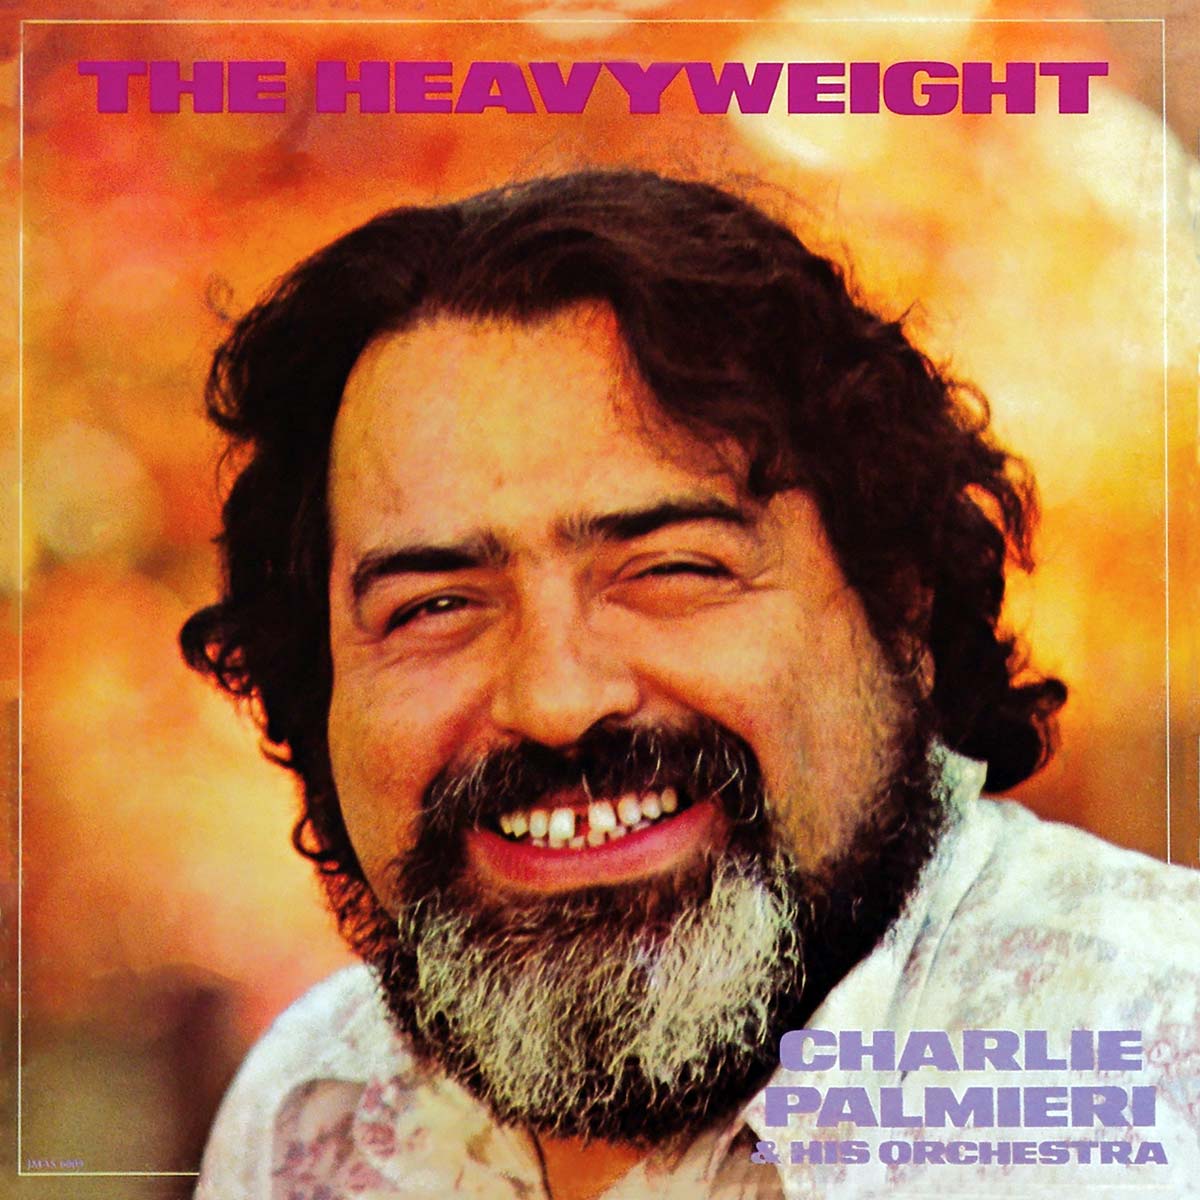 Featured Image for “THE HEAVYWEIGHT”